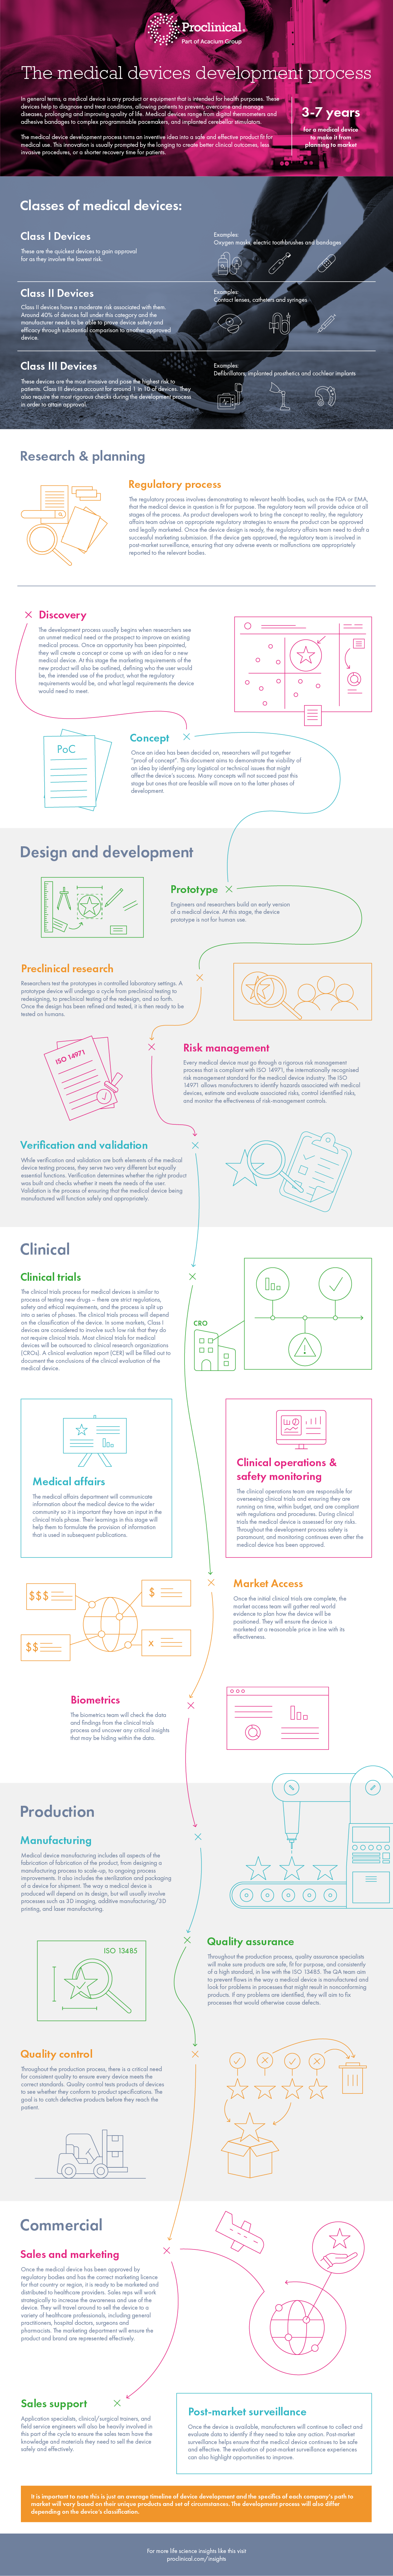 Infographic: The medical devices development process infographic